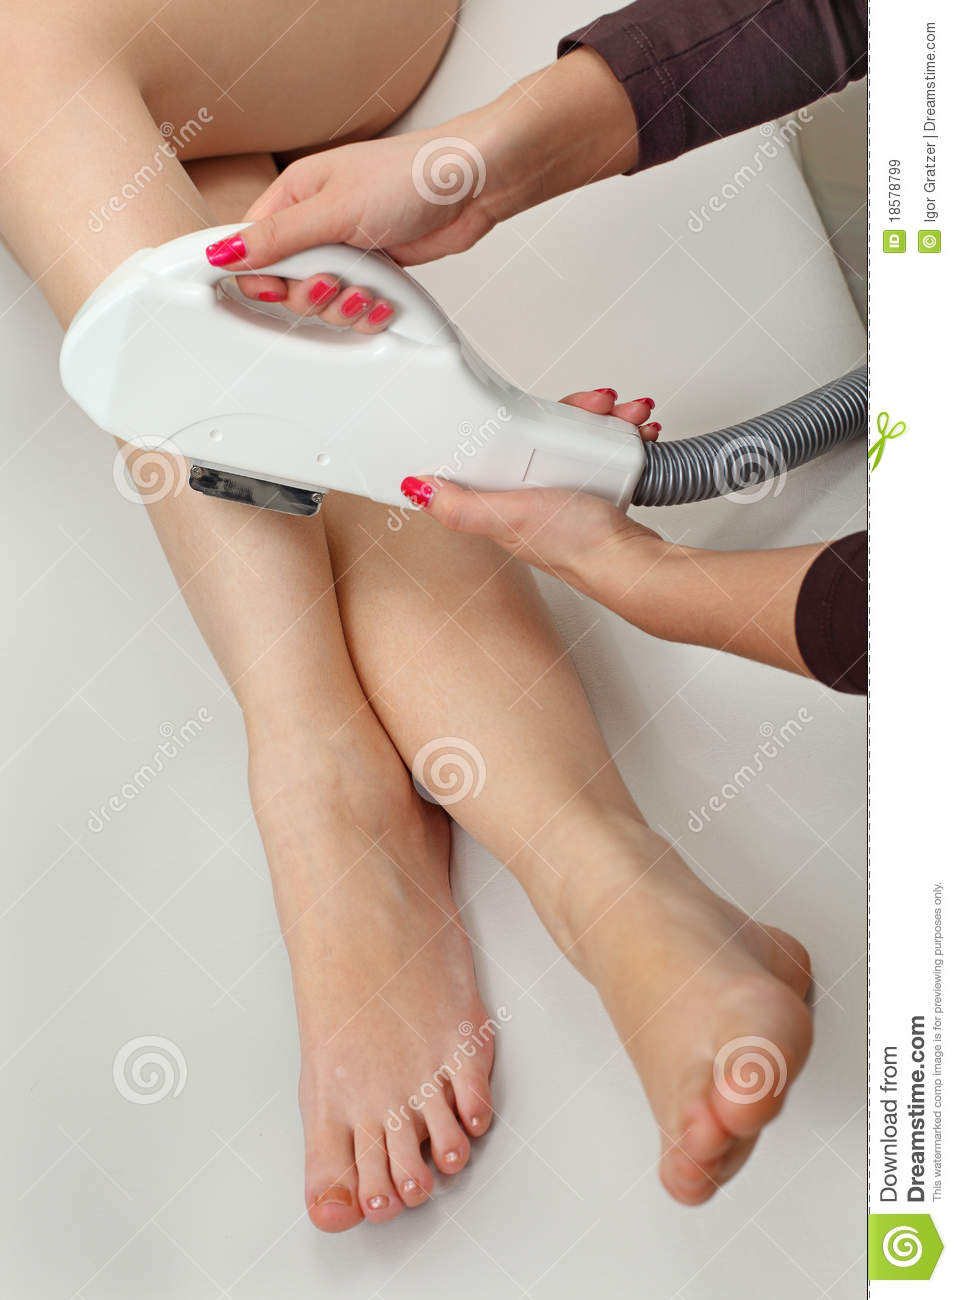 Laser Hair Removal Royalty Free Stock Images   Image  18578799